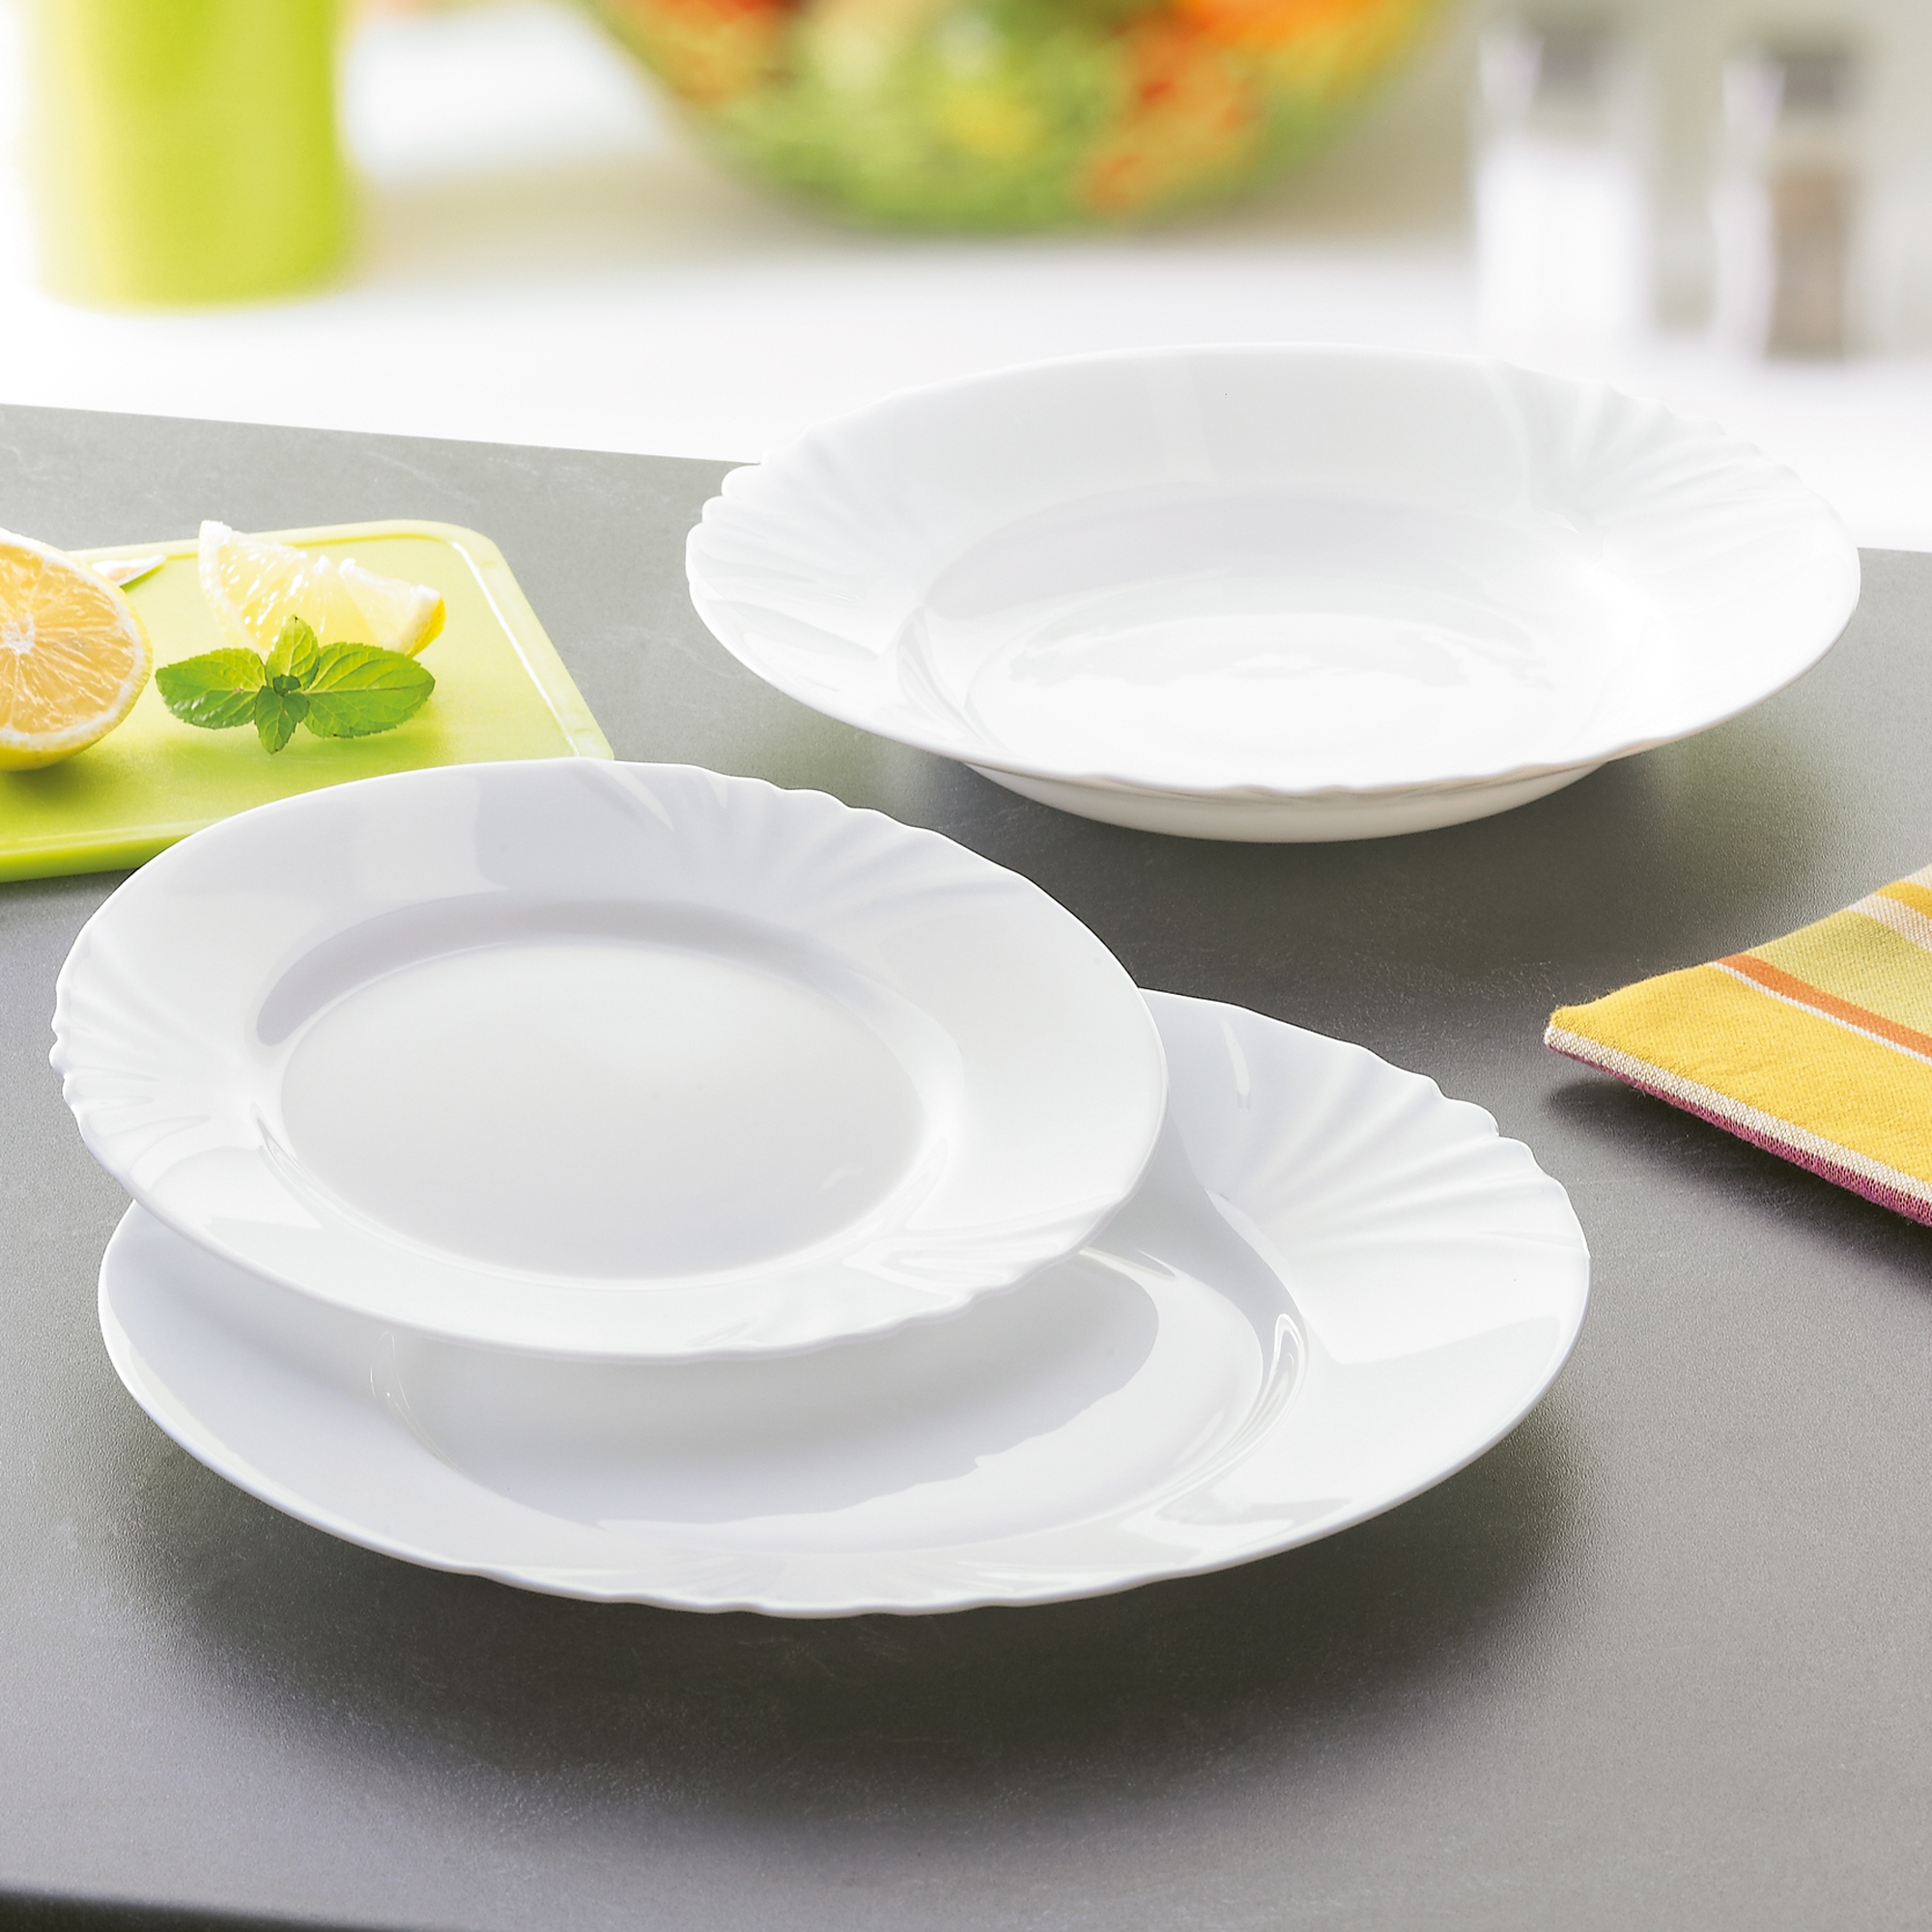 OPAL DINNER SET, Luminarc, Brands, Common, Products